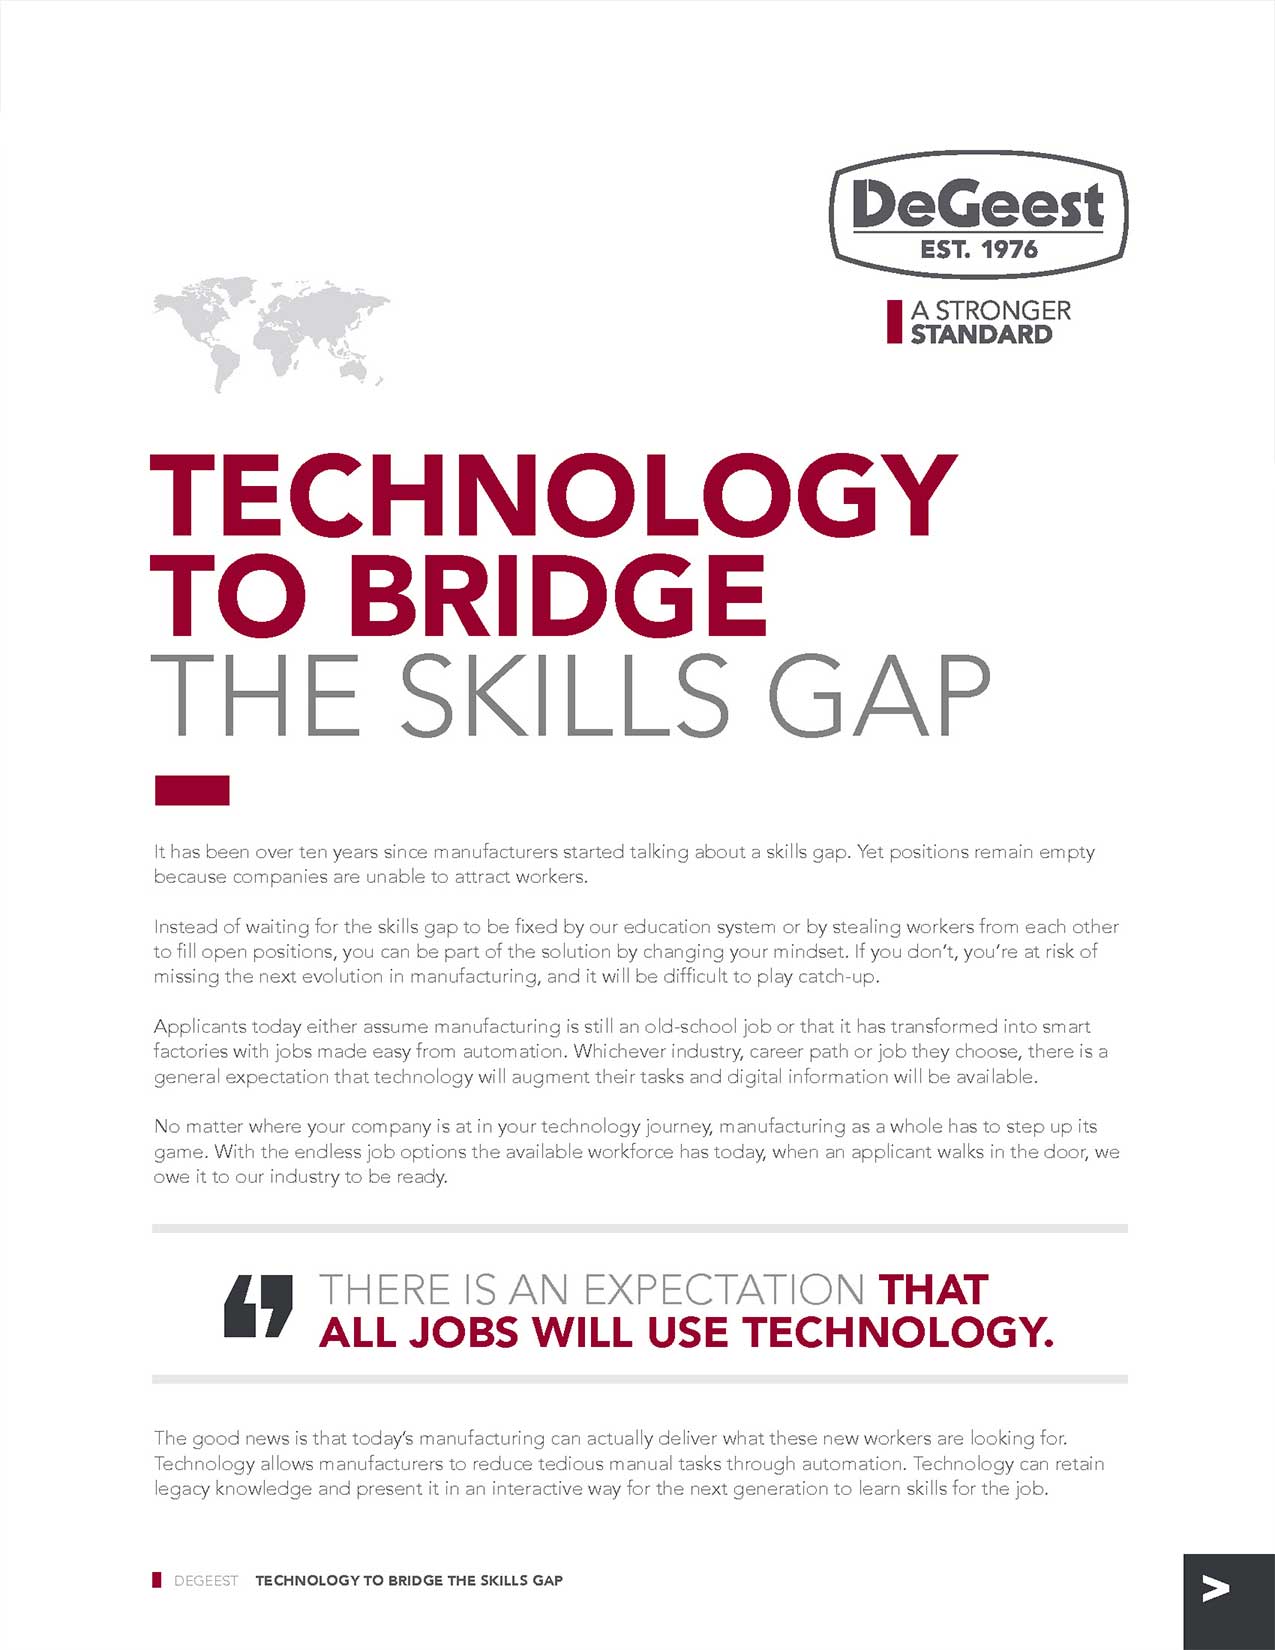 Skills-Gap-Thought-Paper